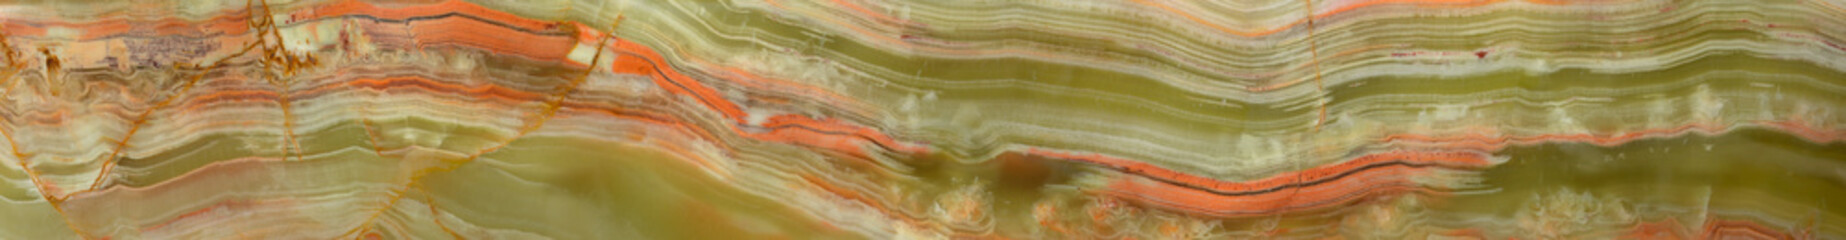 Onyx texture. Green and orange streaks on semi-precious stone surface, variety of agate